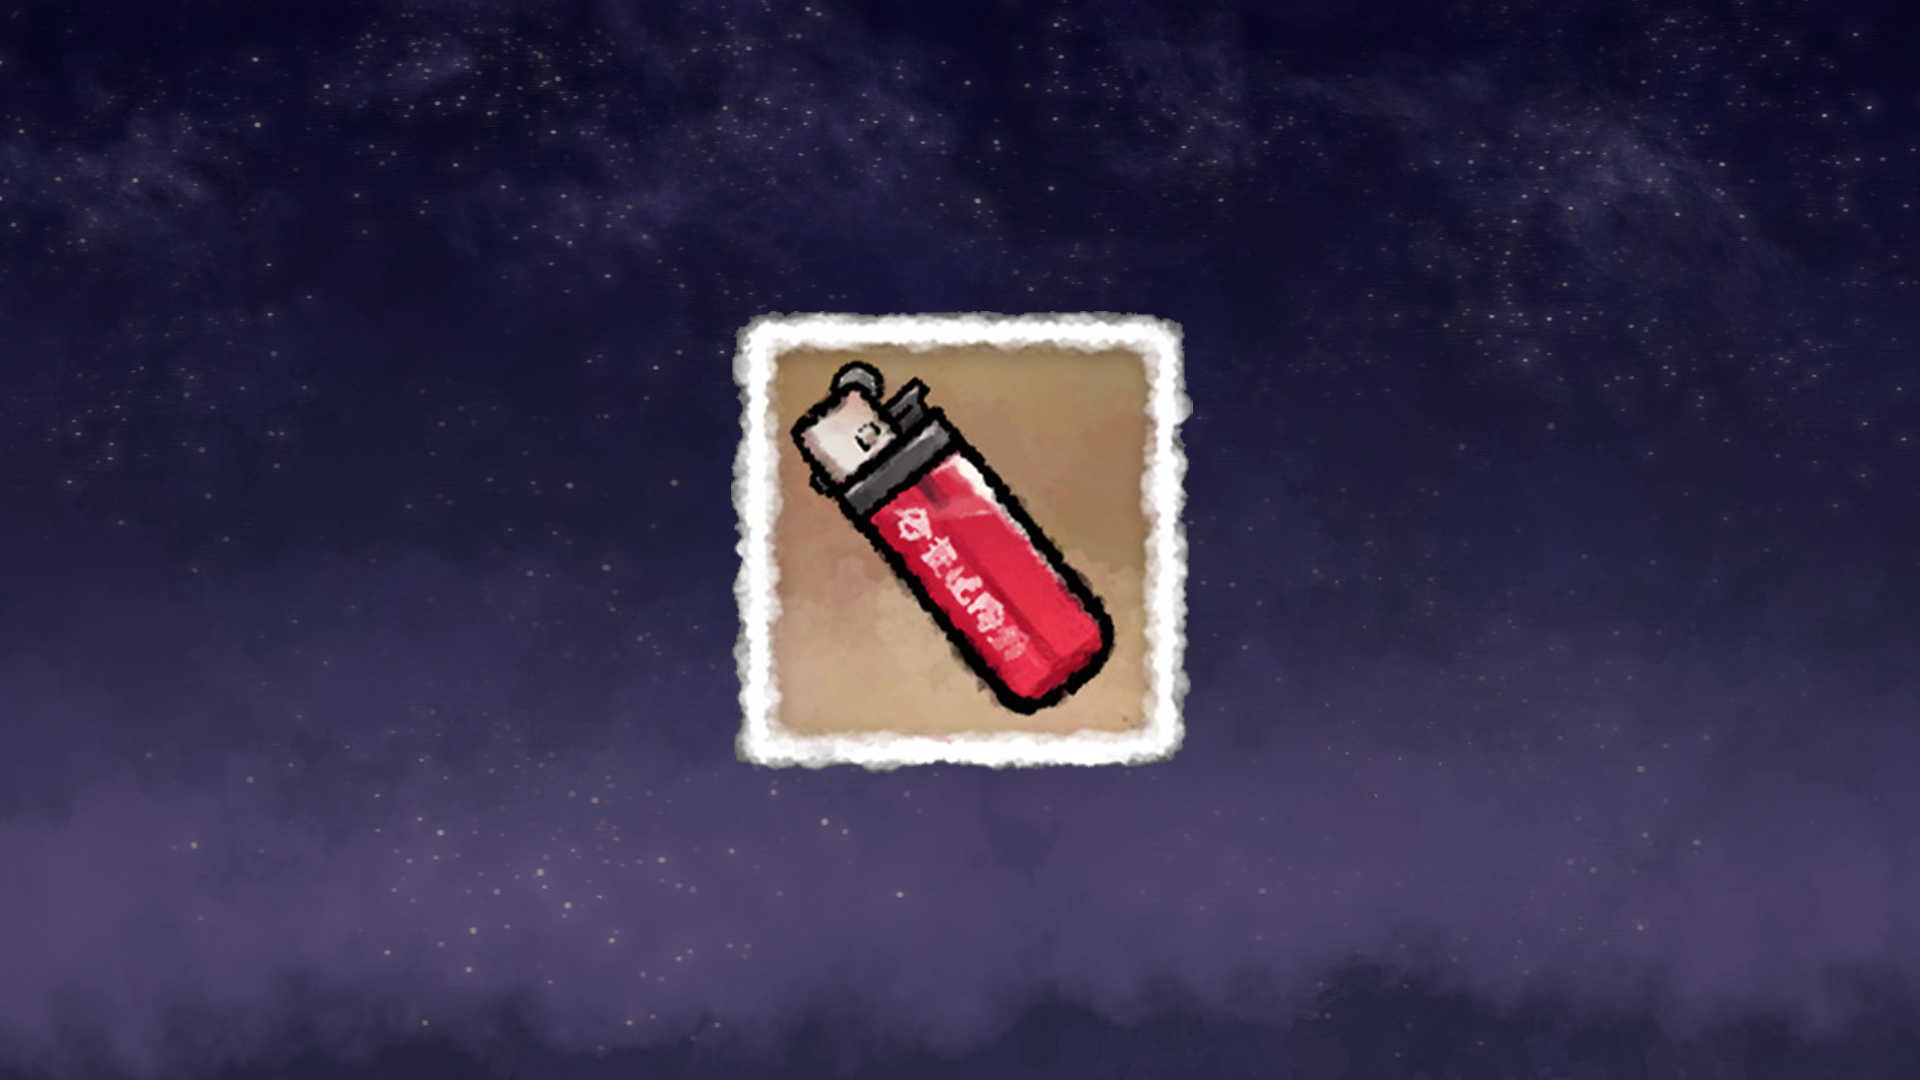 Icon for All Items